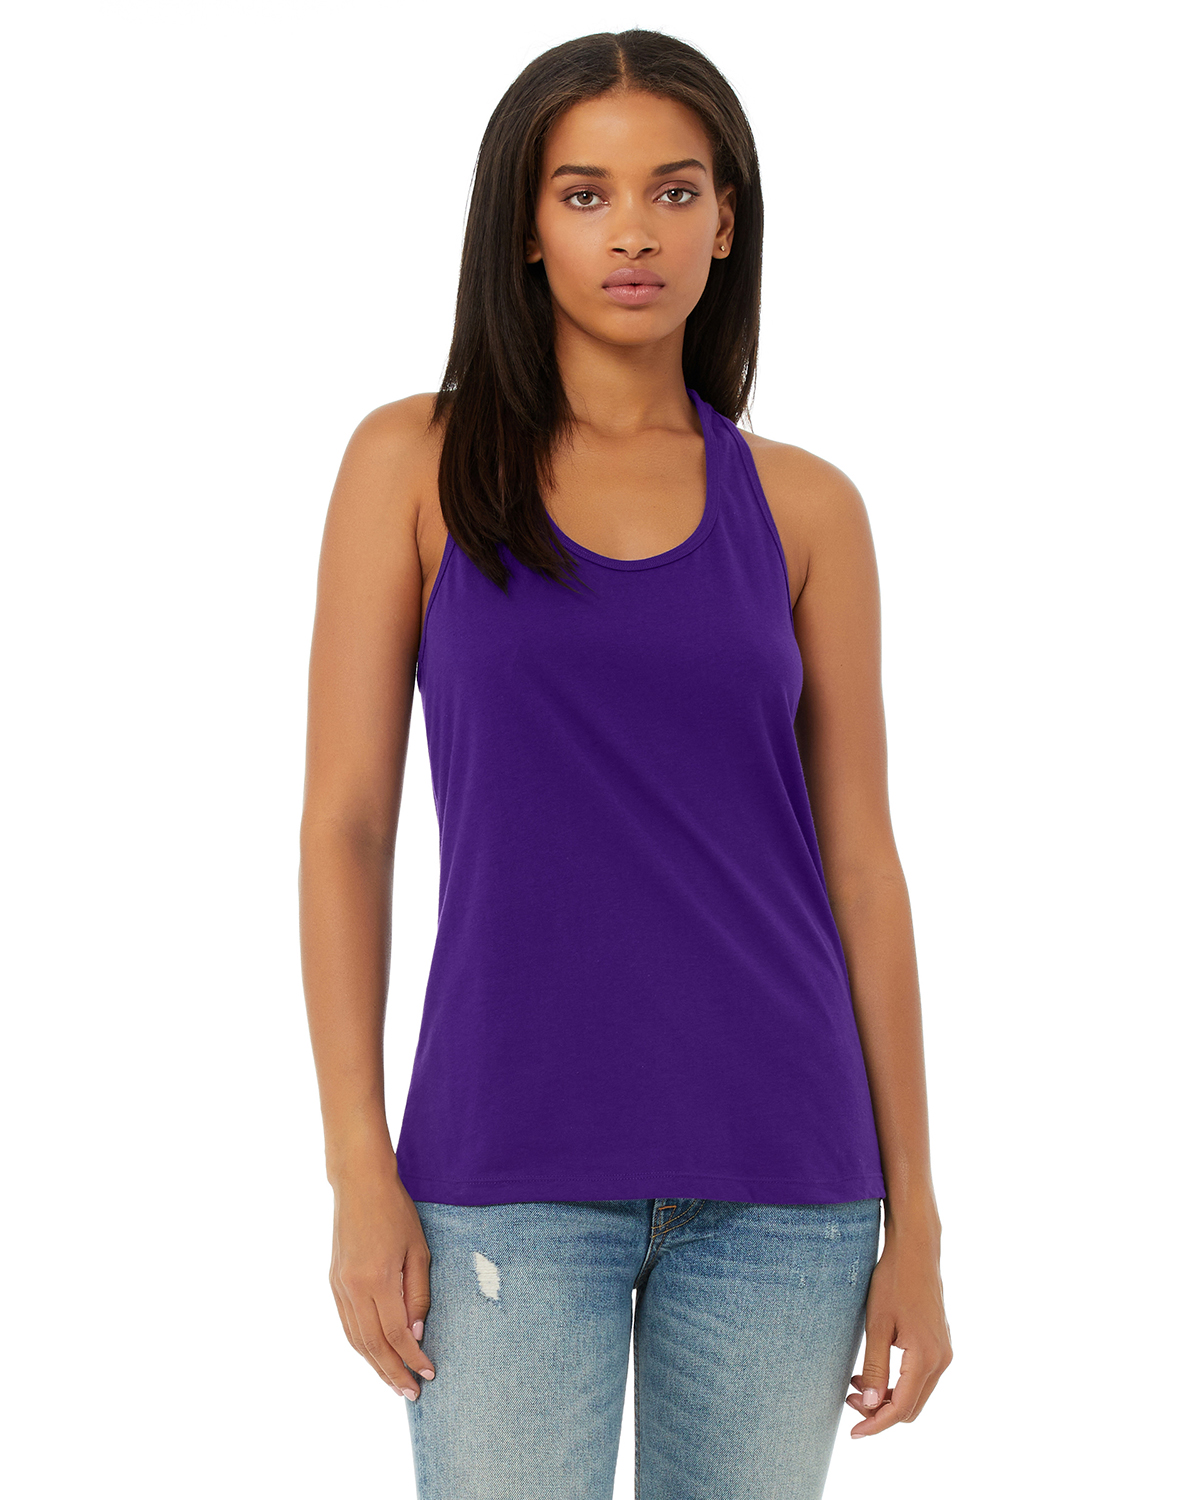 CUSTOM 2-color Wicking Sports Jersey Tanktops in Adult Womens 